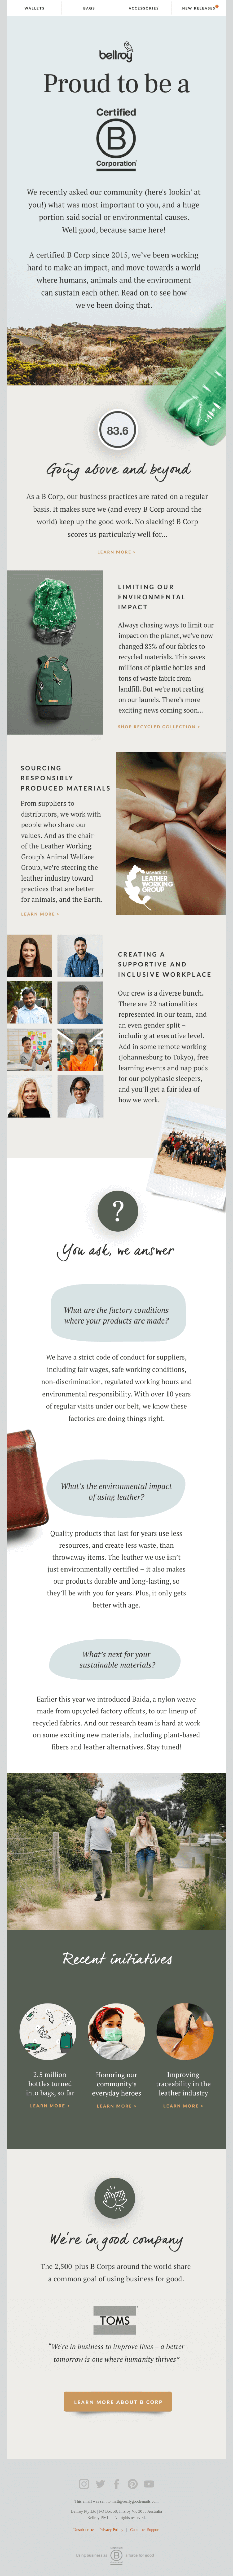 We’re a B Corp, for good! - Bellroy Email Newsletter